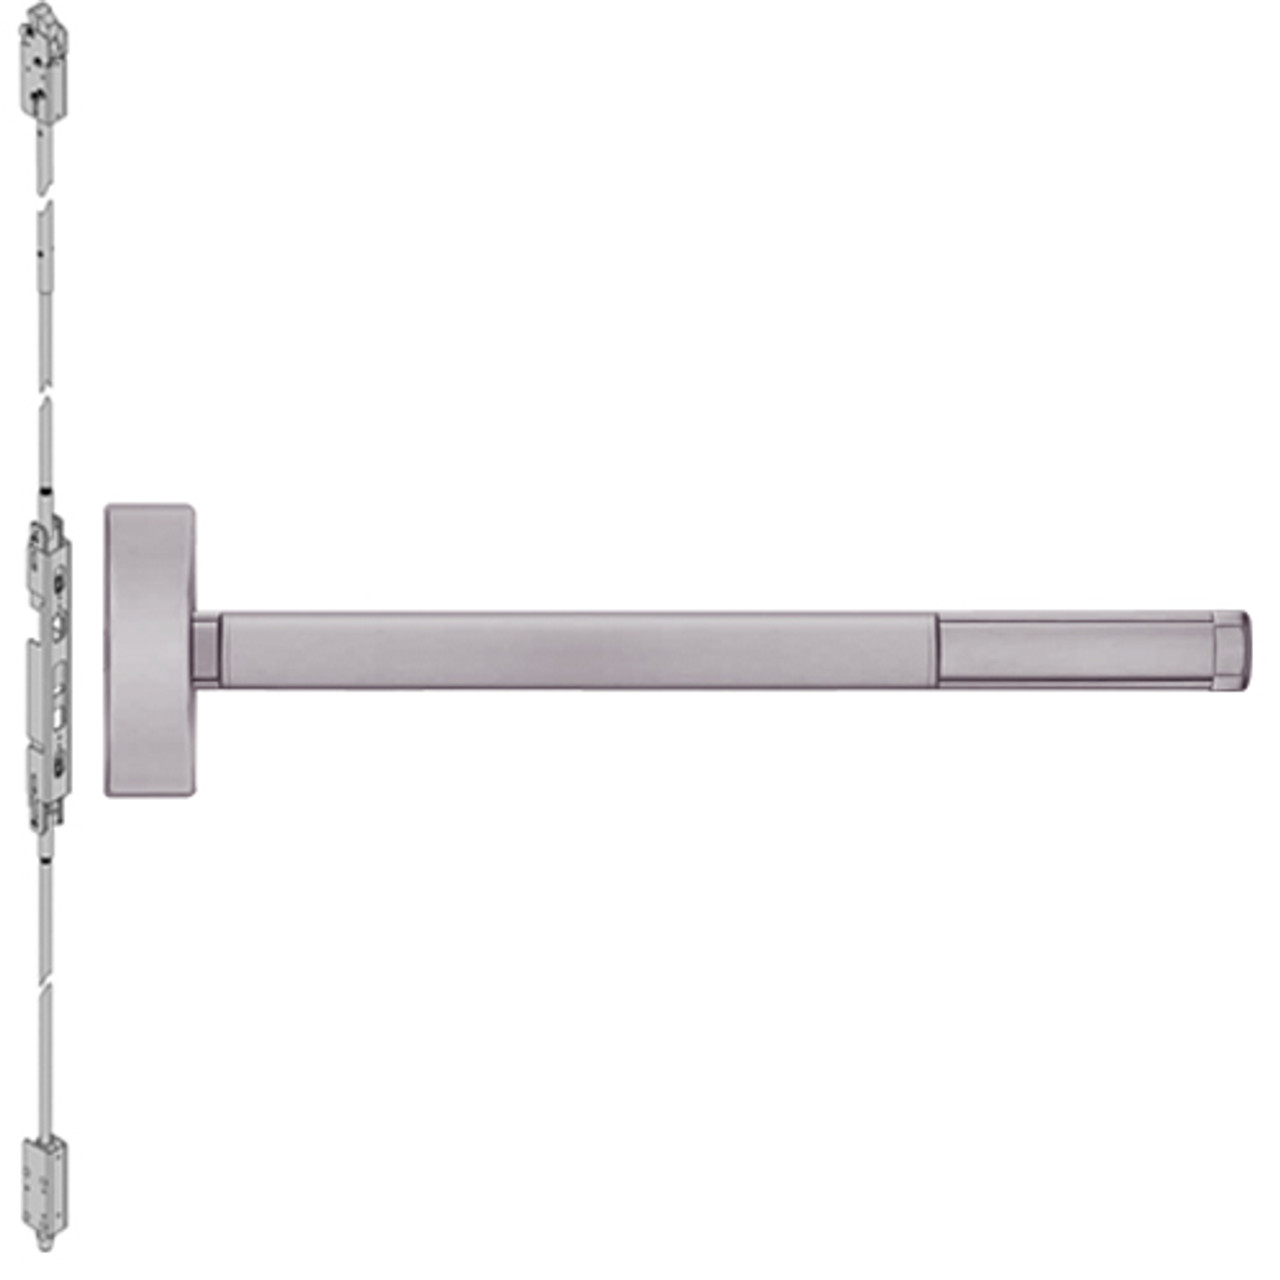 FL2801-630-48 PHI 2800 Series Fire Rated Concealed Vertical Rod Exit Device Prepped for Cover Plate in Satin Stainless Steel Finish